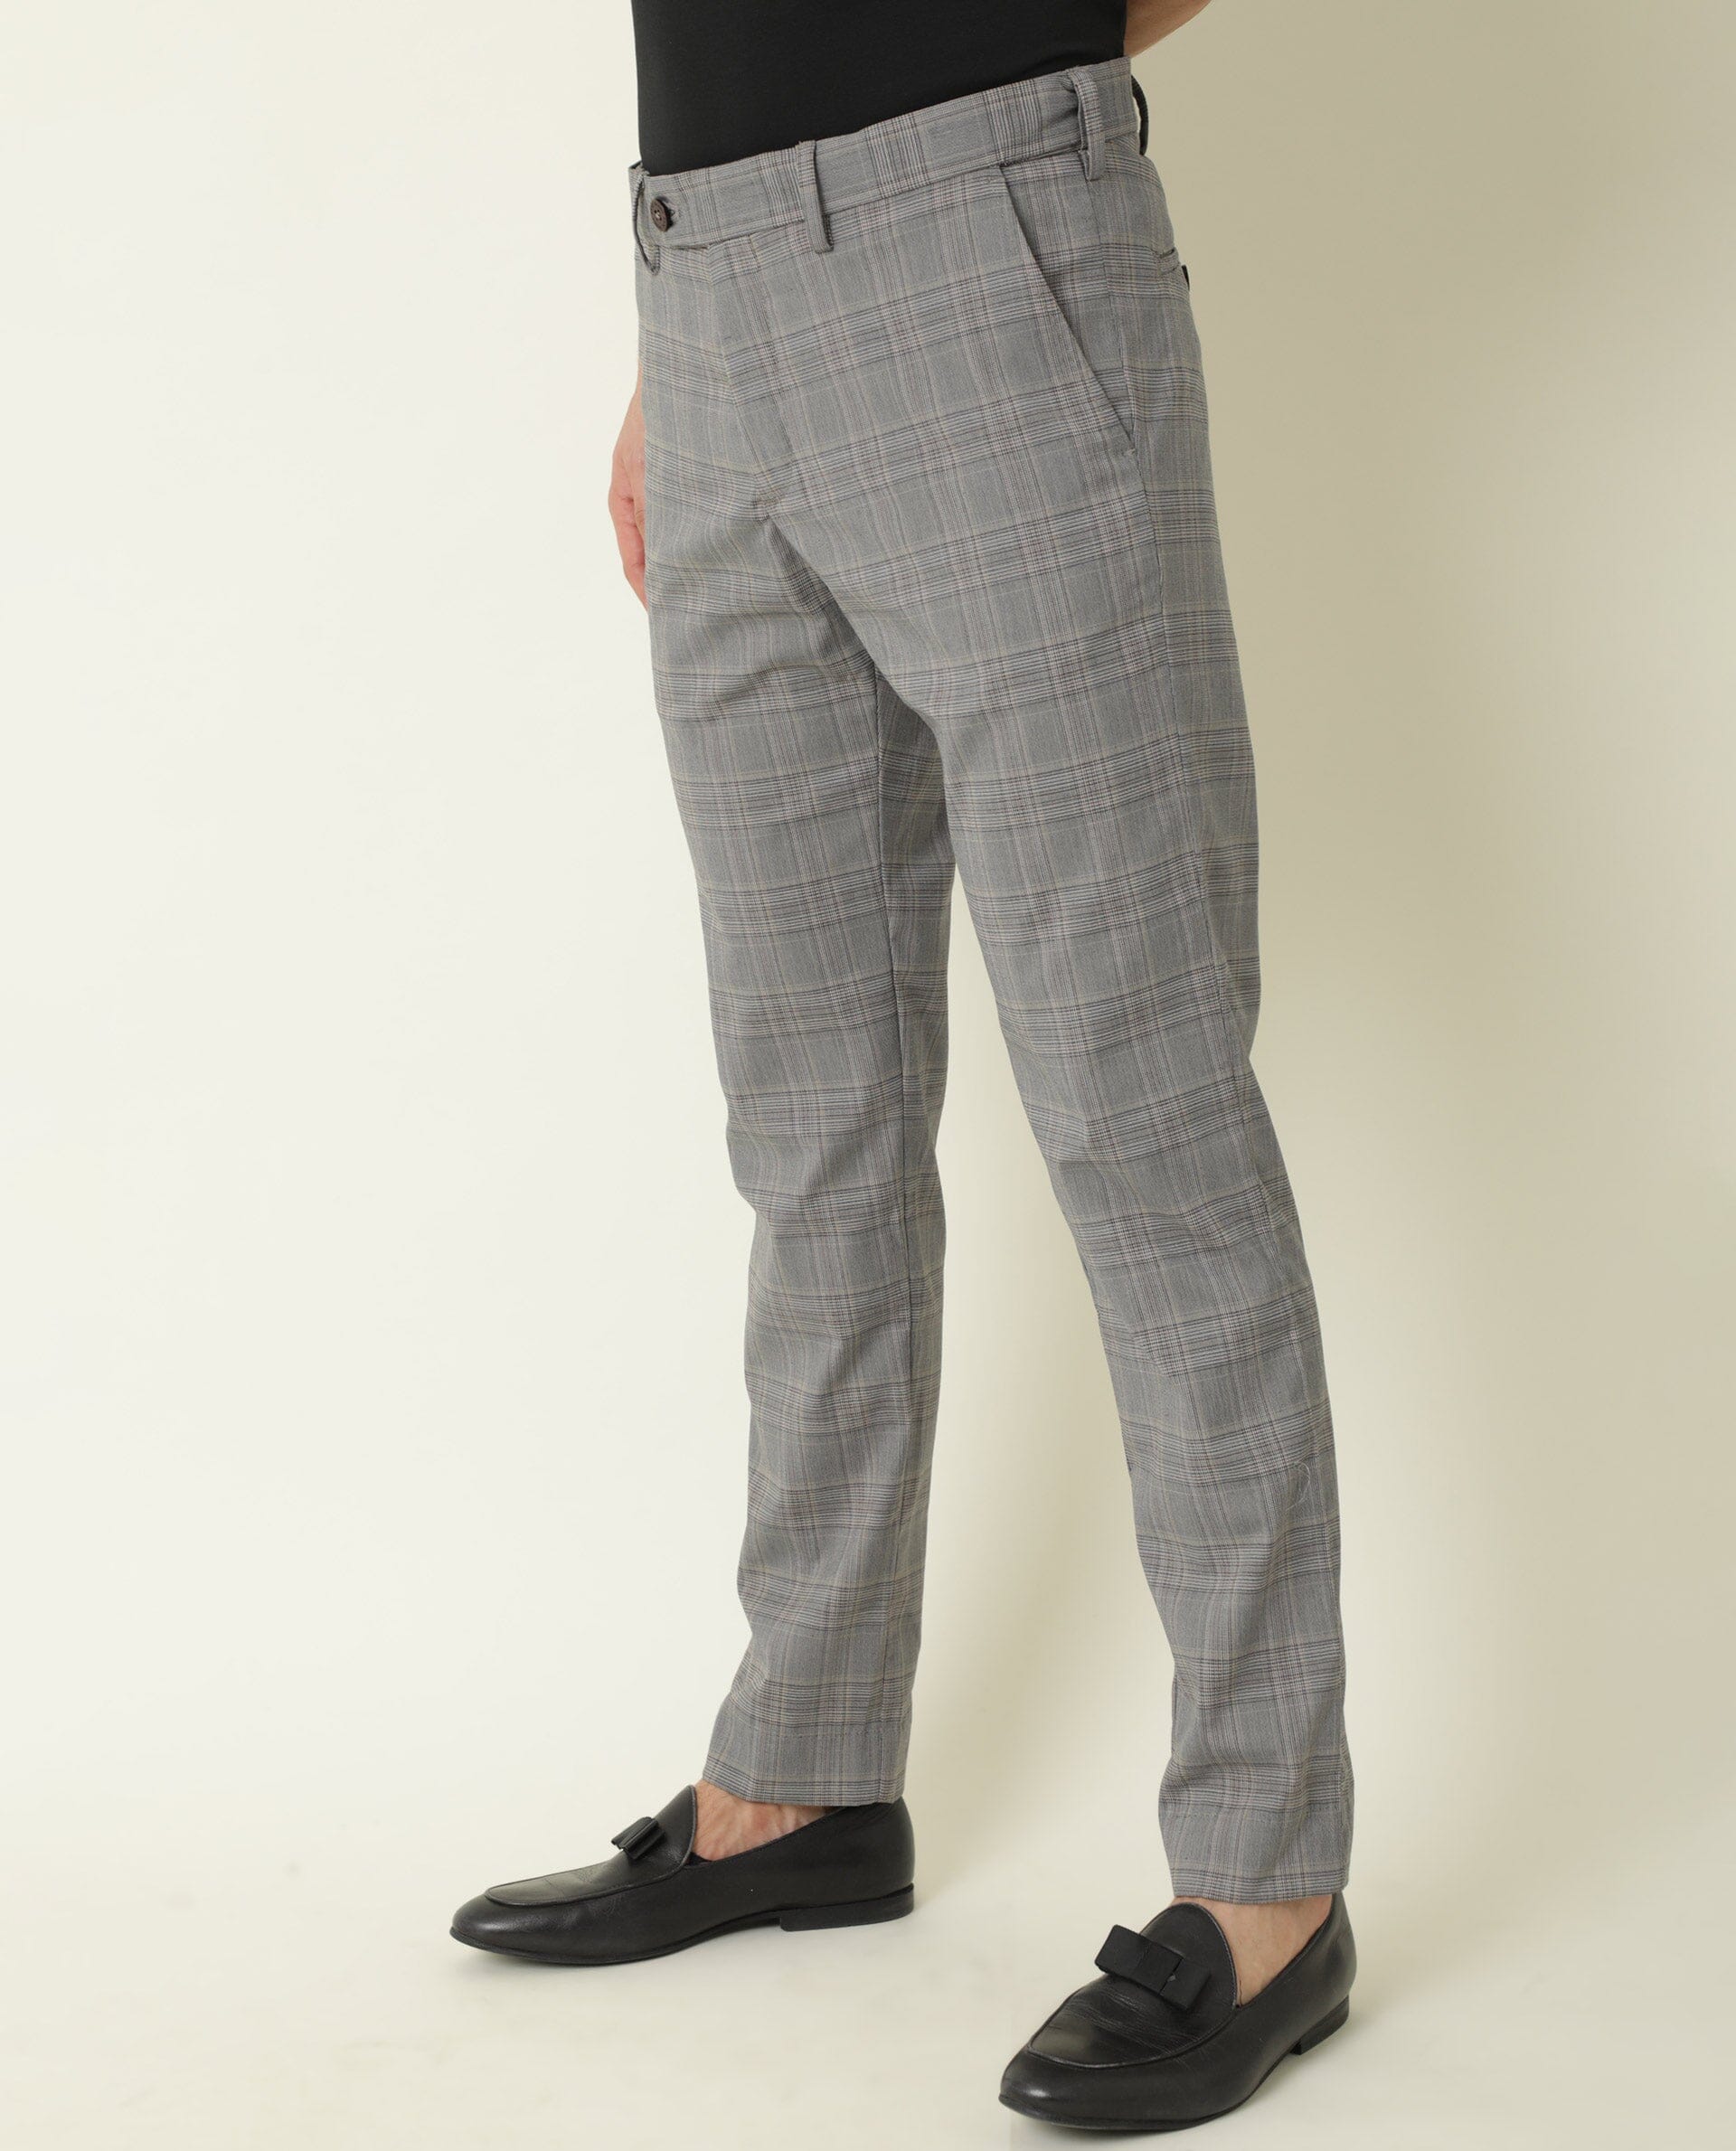 River Island smart trousers in grey check | ASOS